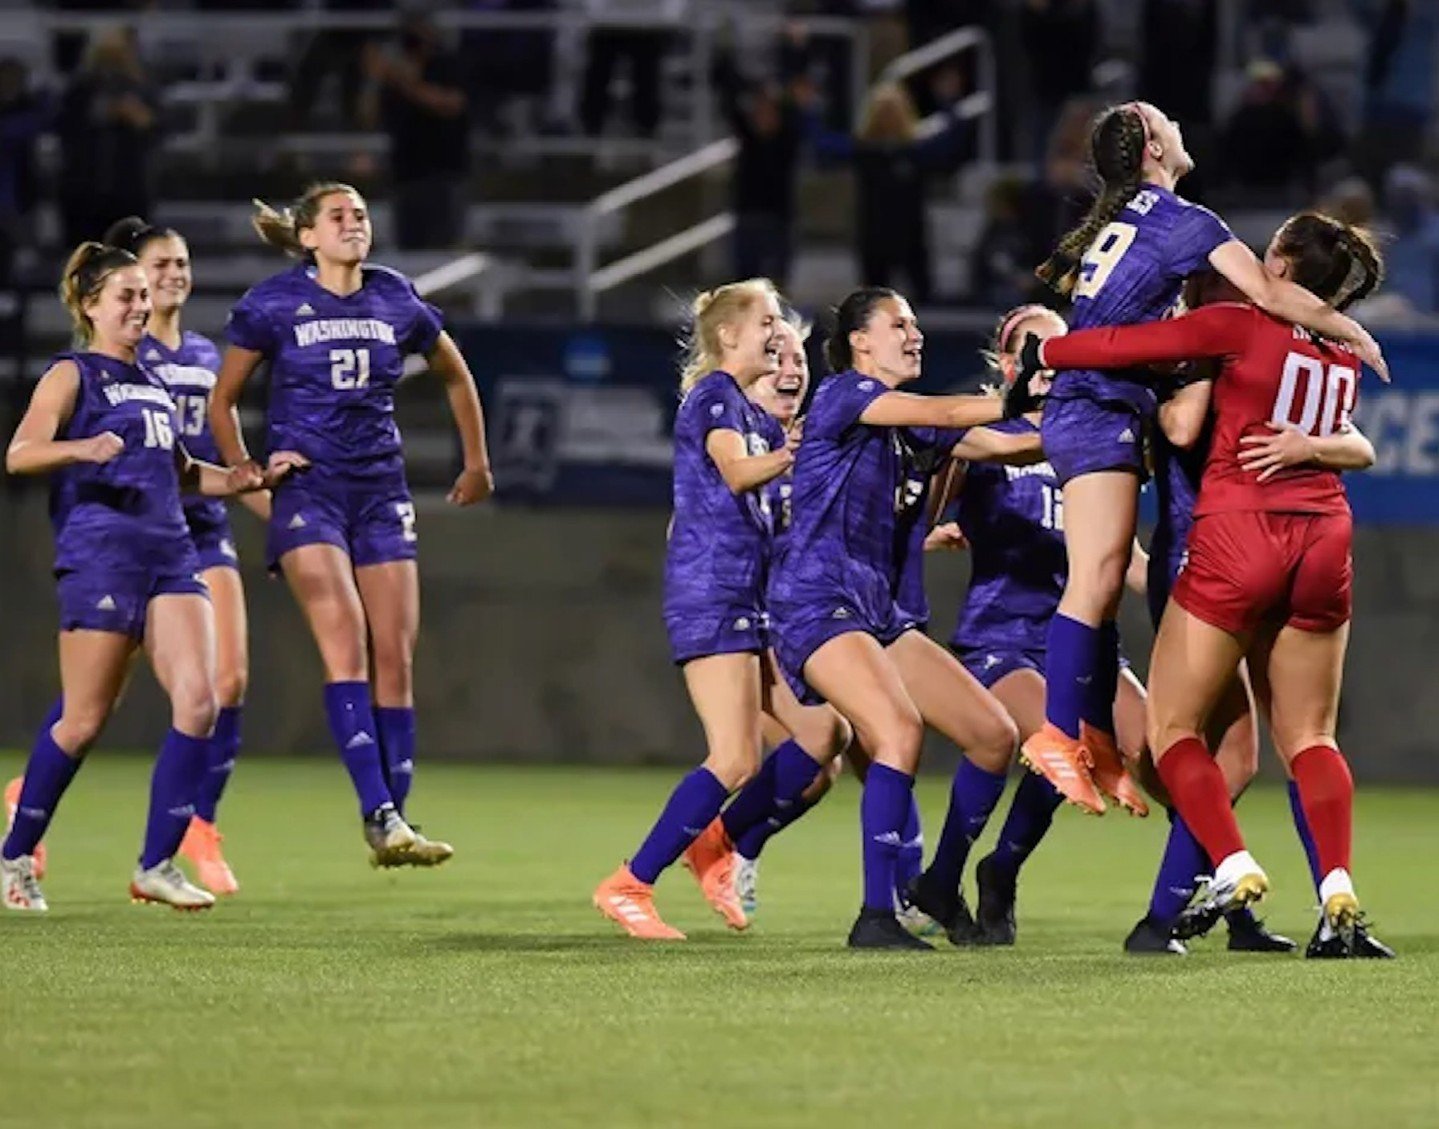 They were strange times, four years ago this week. The pandemic-postponed collegiate season was peaking in North Carolina, and Washington keeper Olivia Sekany both saved and scored in the shootout for the Huskies to advance past St. Louis to the NCAA